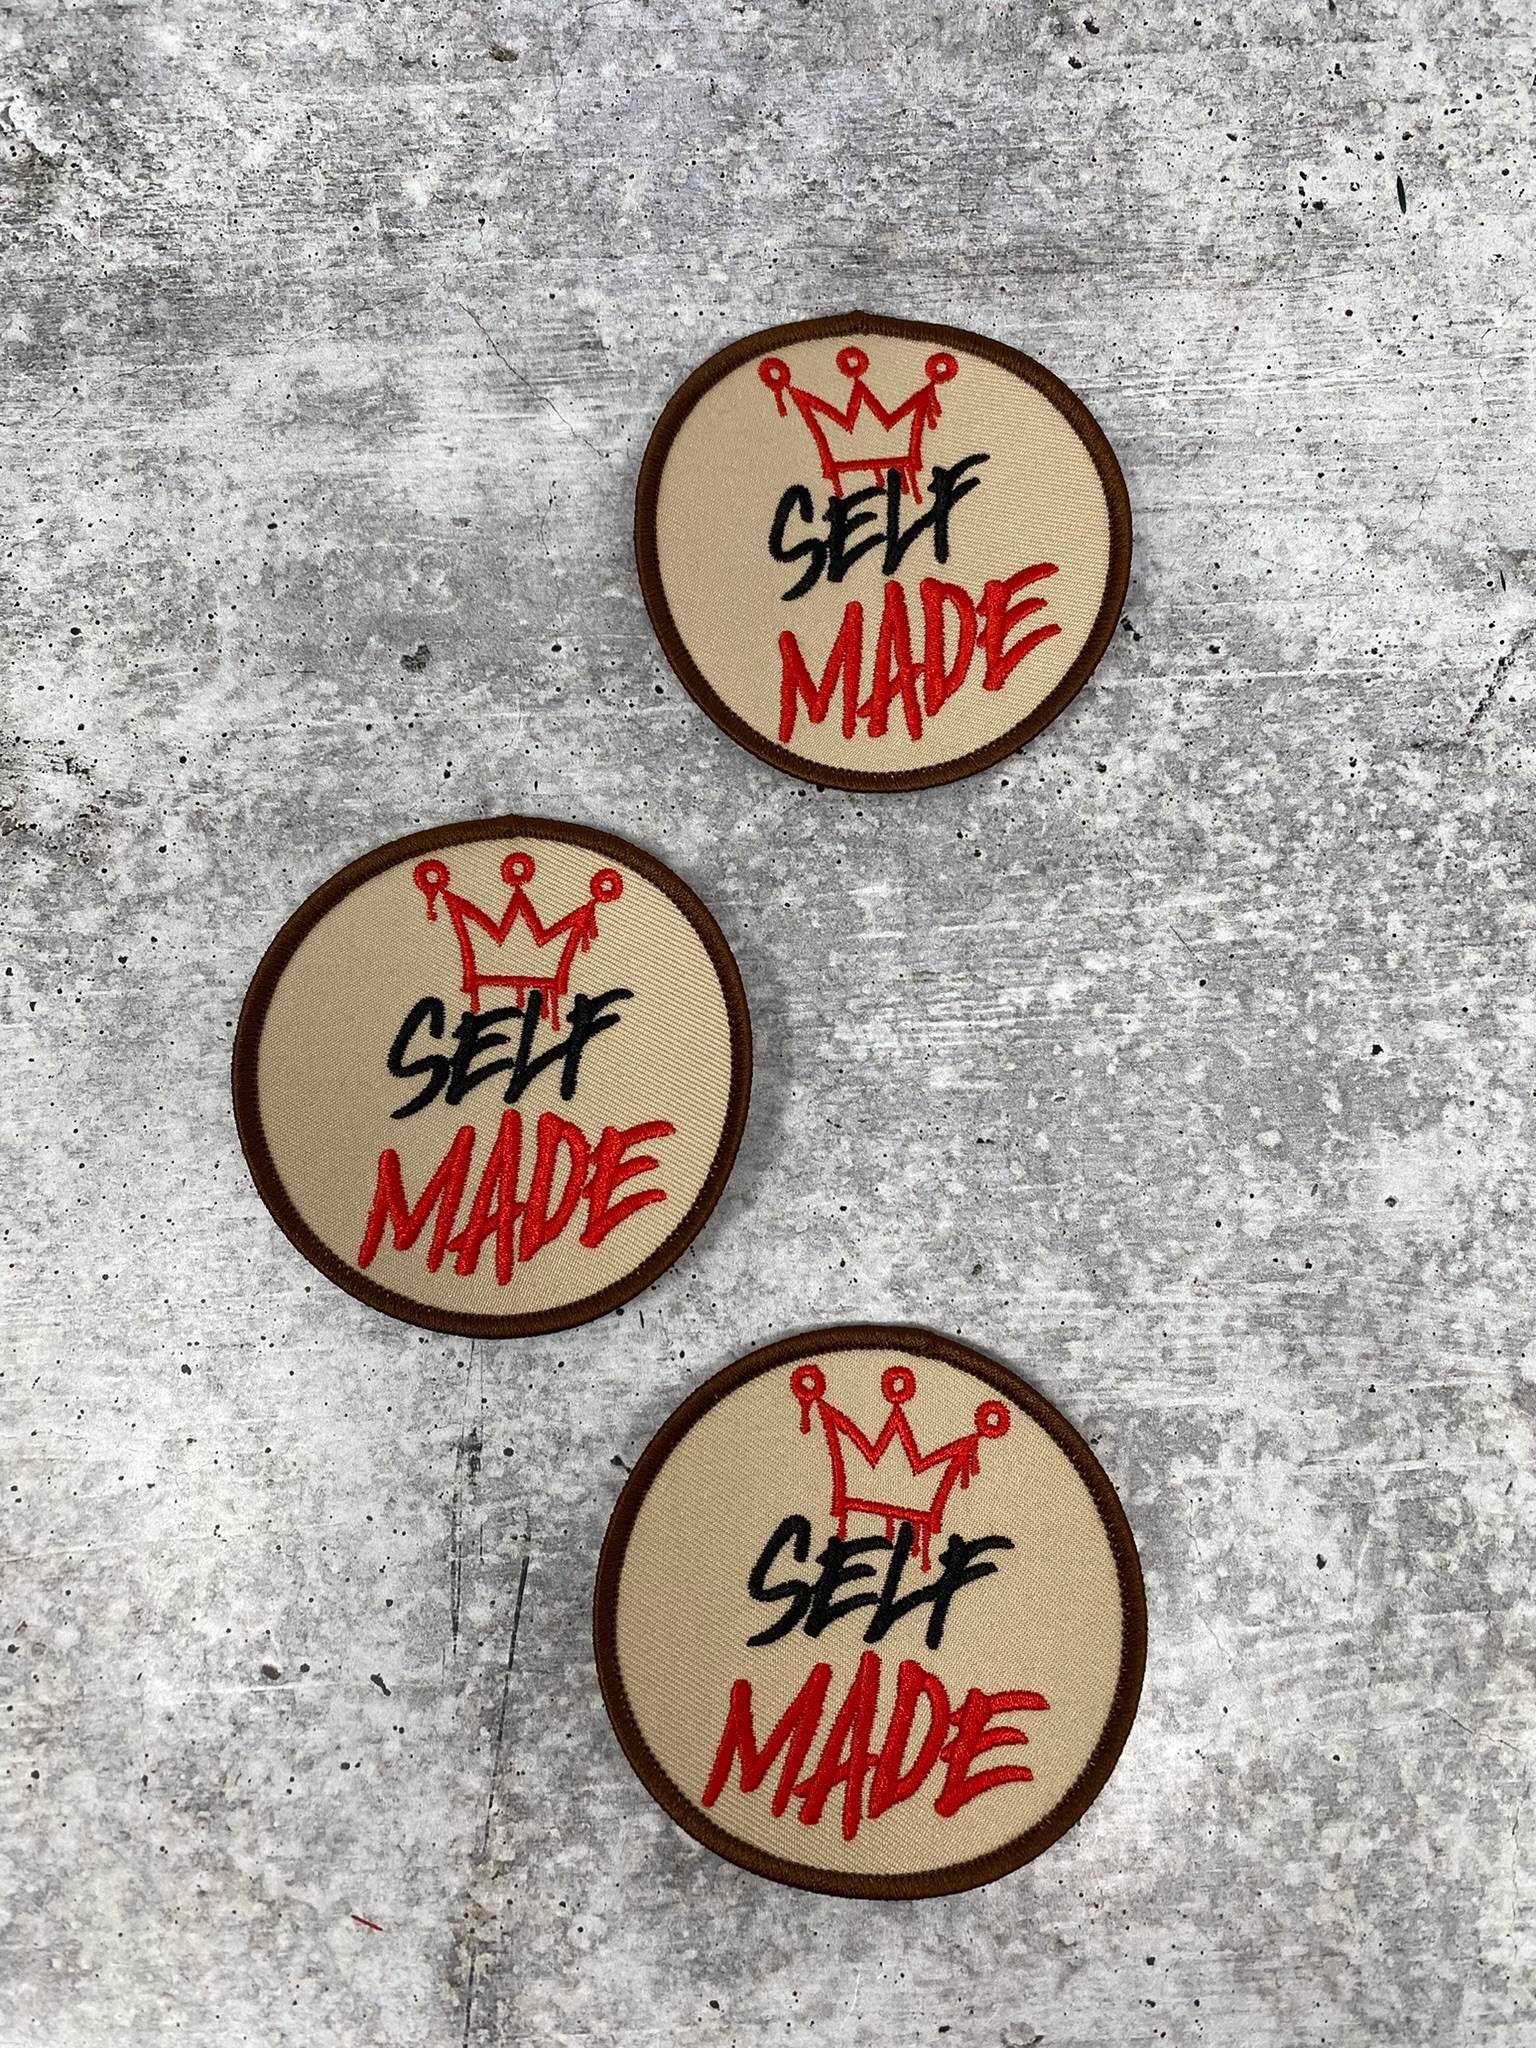 Exclusive, 1-pc "Self-Made" Emblem, Beige/Red/Brown Iron On Embroidered Patch,  Size 3.25" Applique for Crocs, Patches for Hats and Jackets